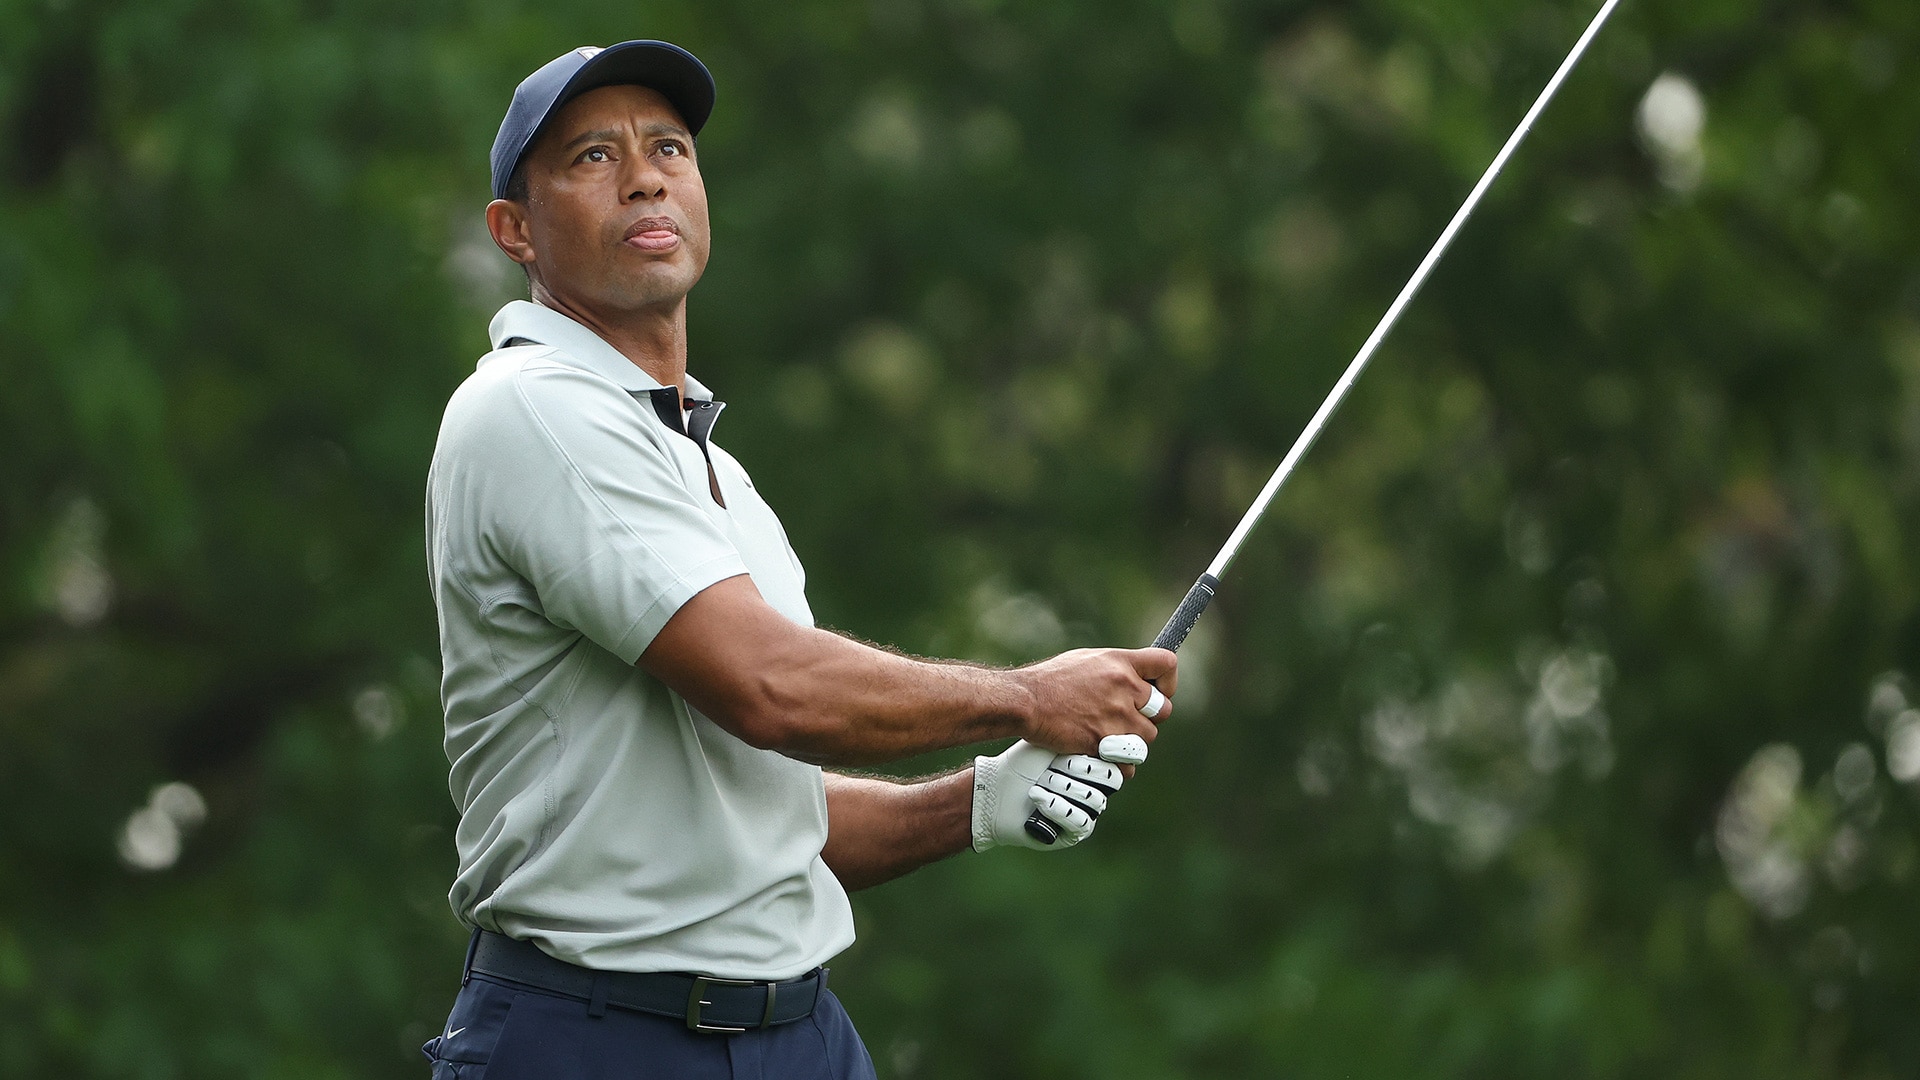 Thirty-three more players qualify for U.S. Open; Tiger Woods officially out